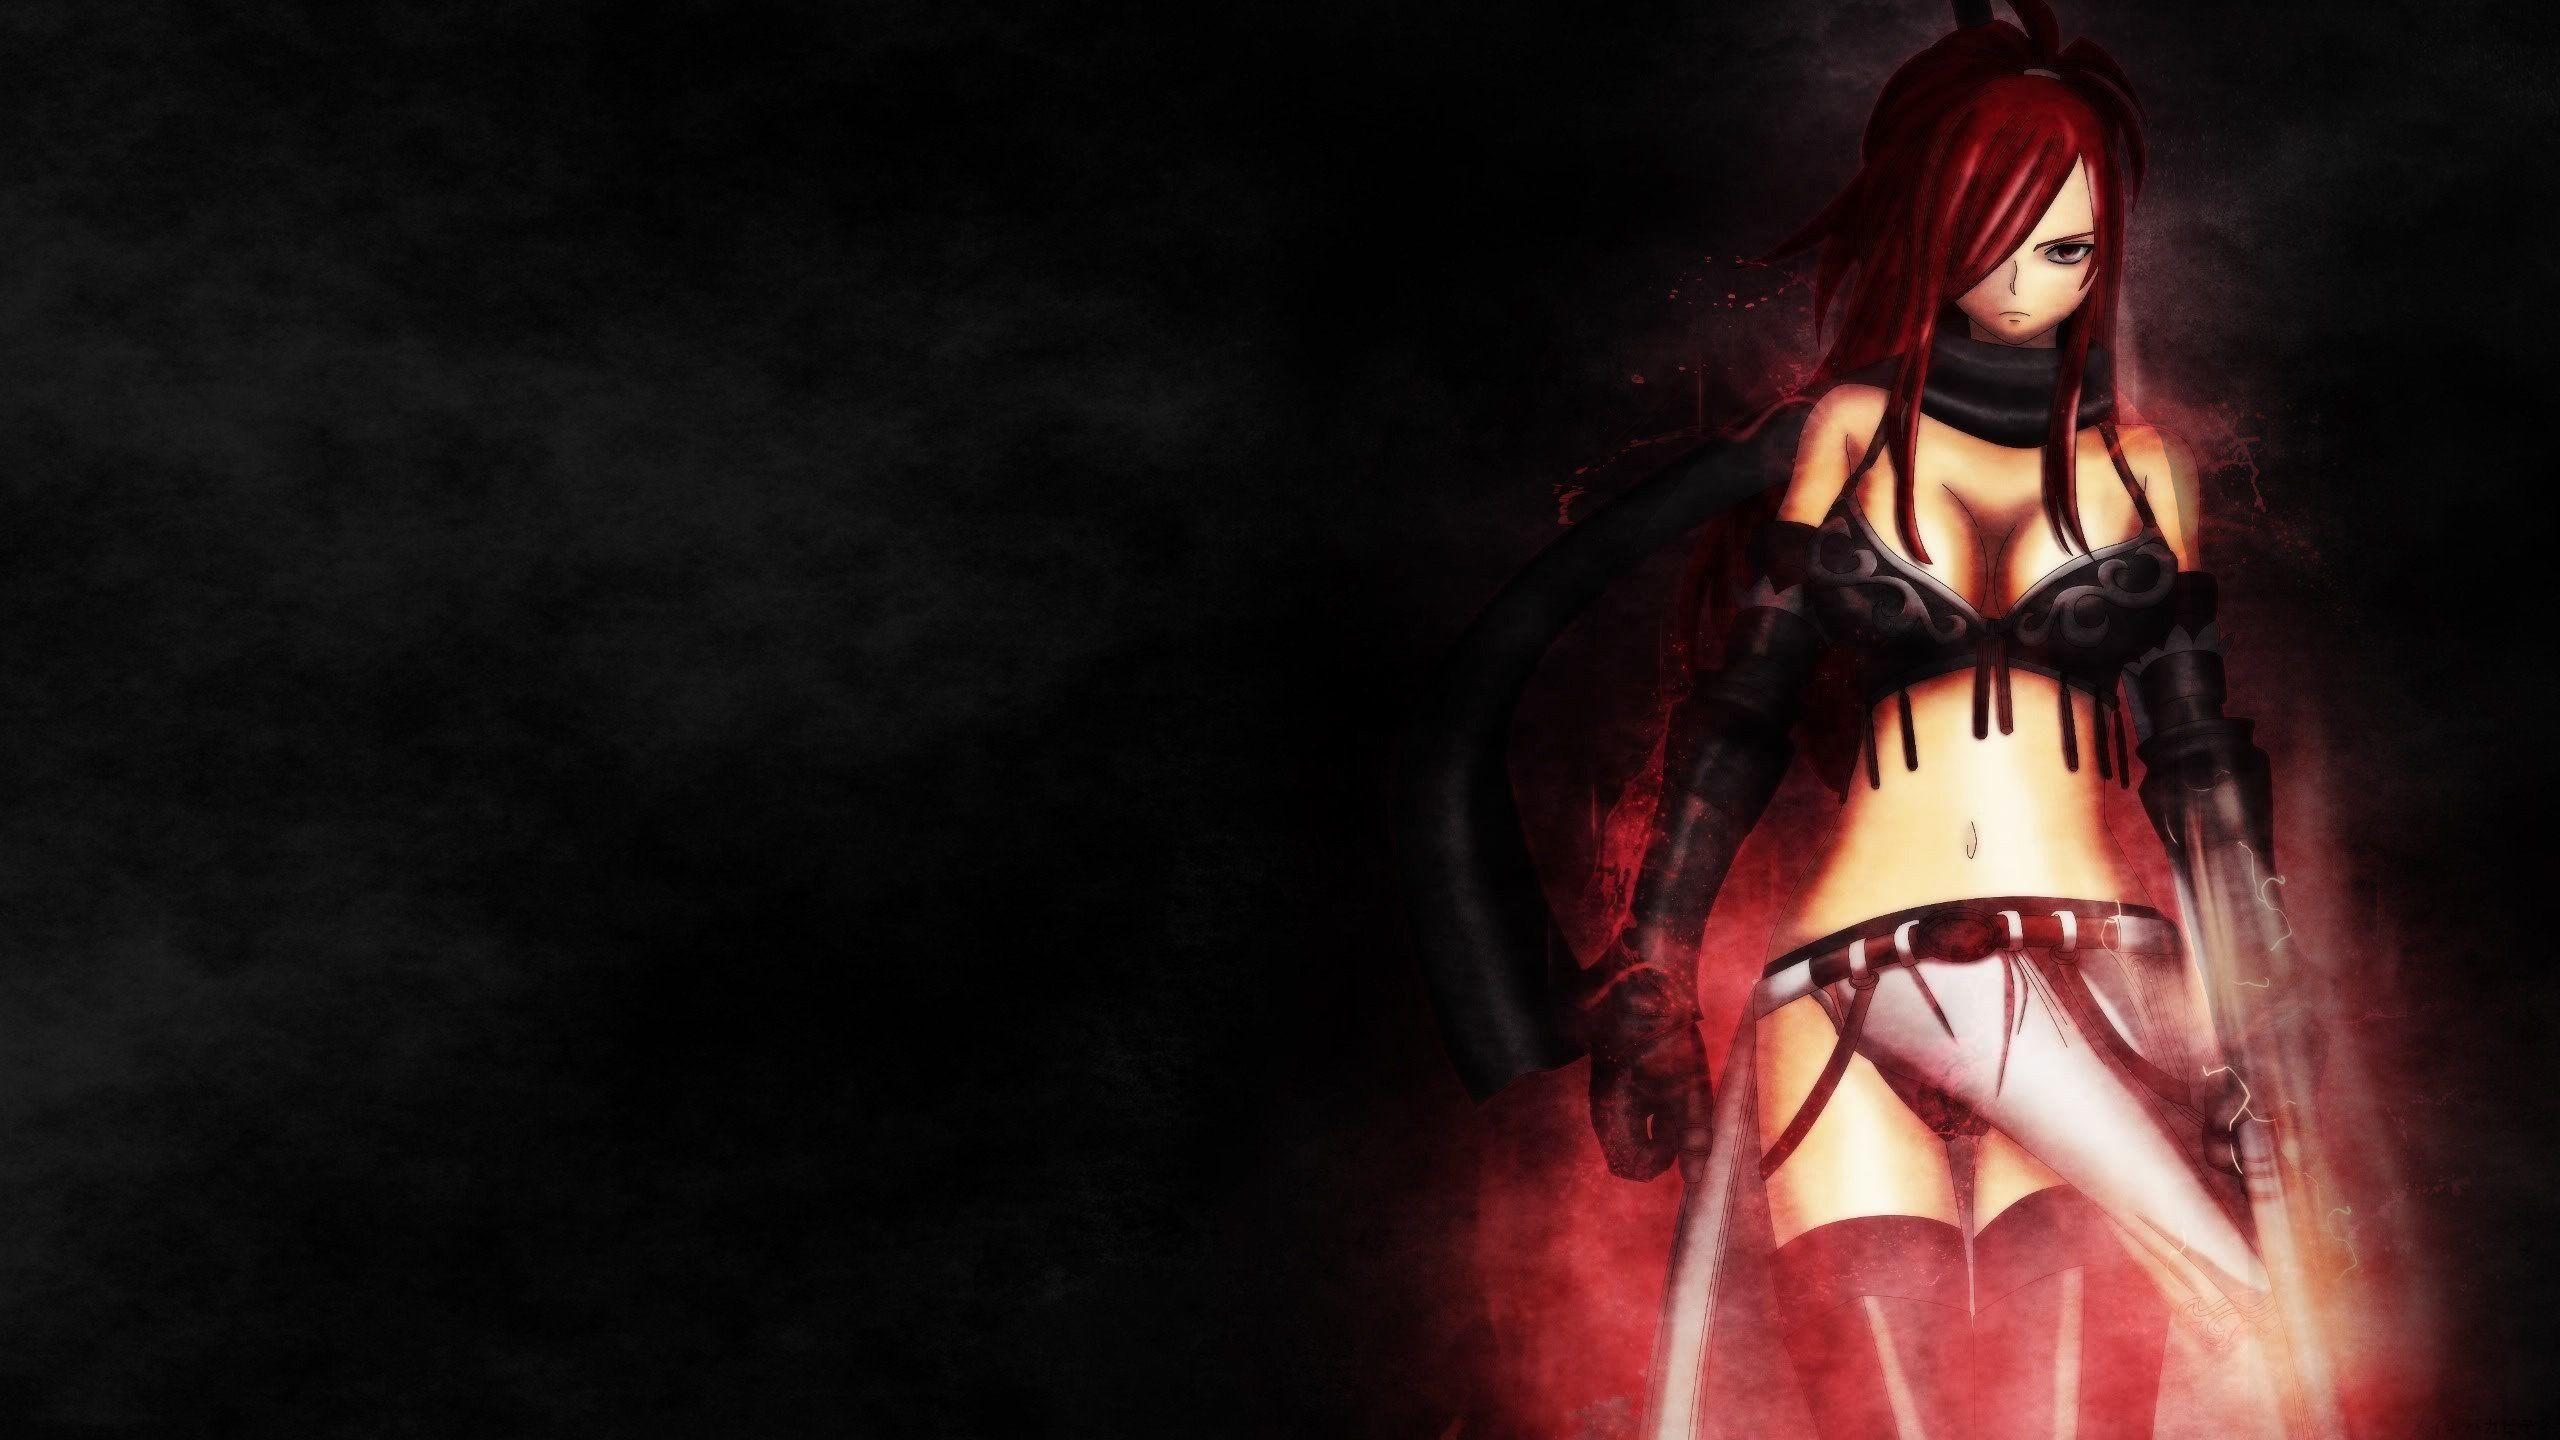 Wallpaper HD For Anime Fairy Tail Scarlet Erza Android Image